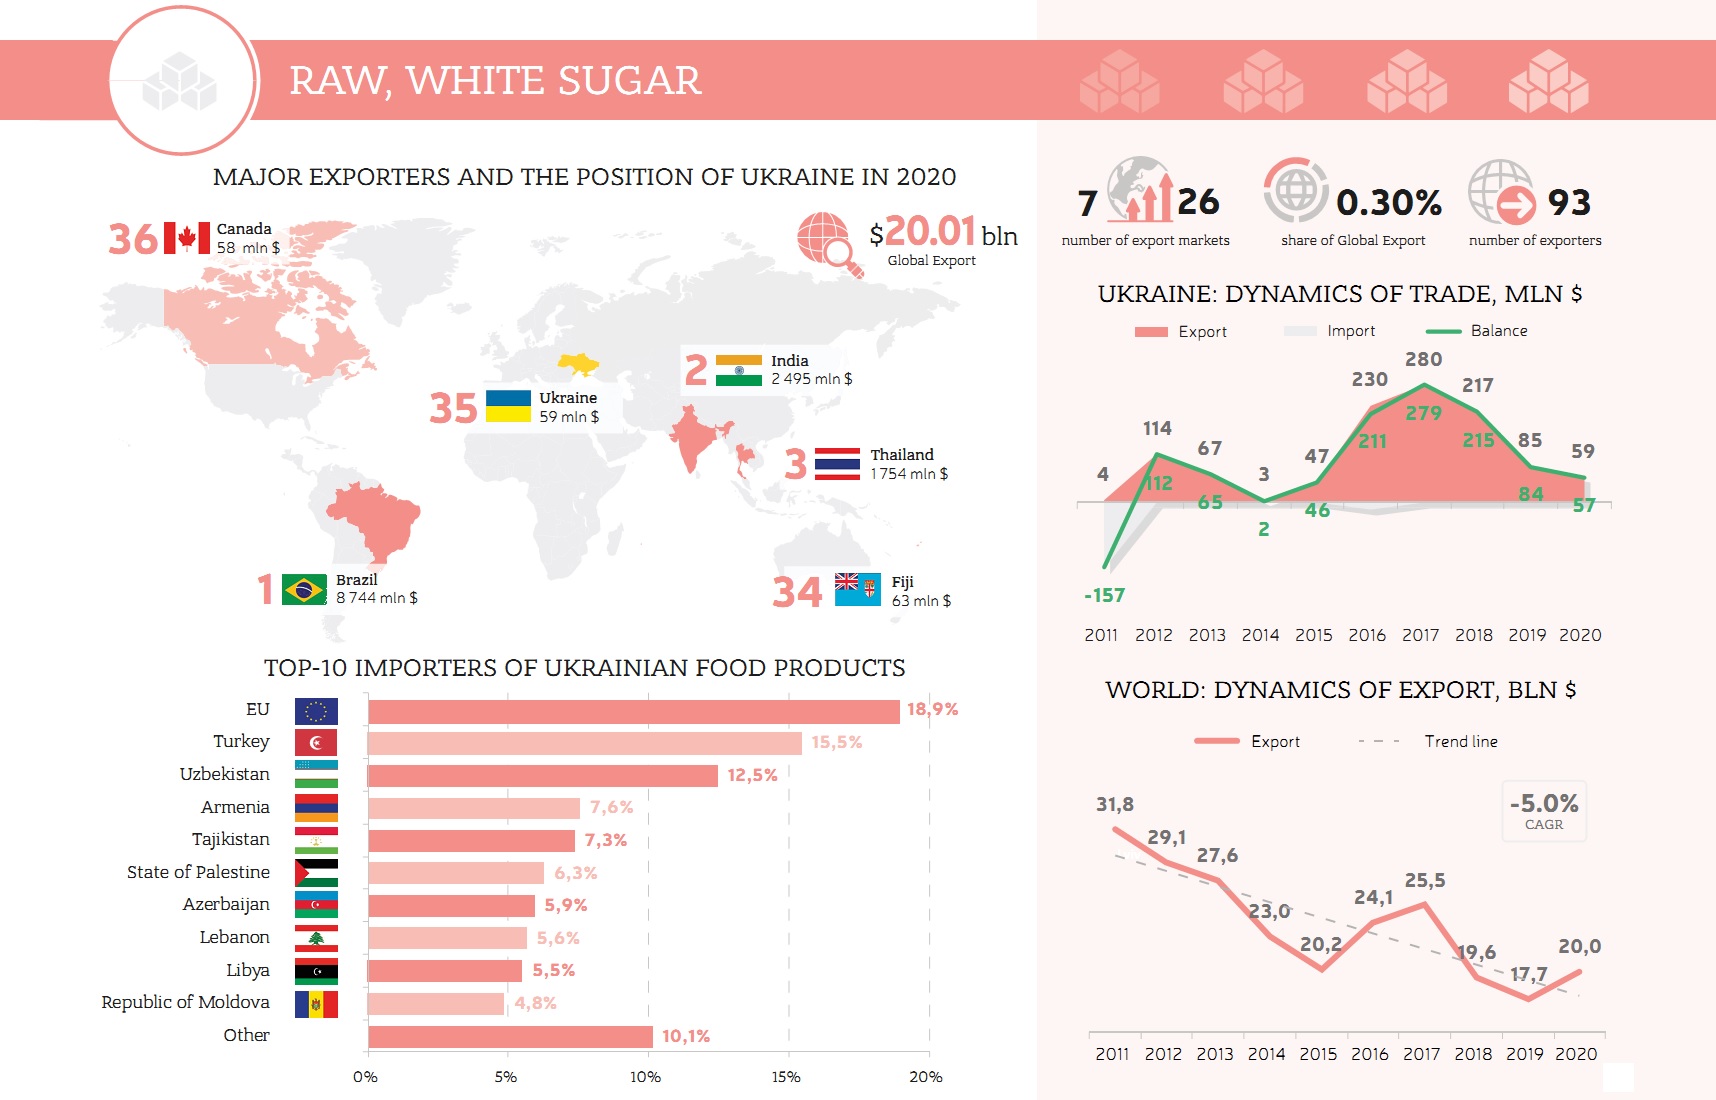 The world white sugar market and Ukraine's place in it (click for higher resolution). Source: UBTA